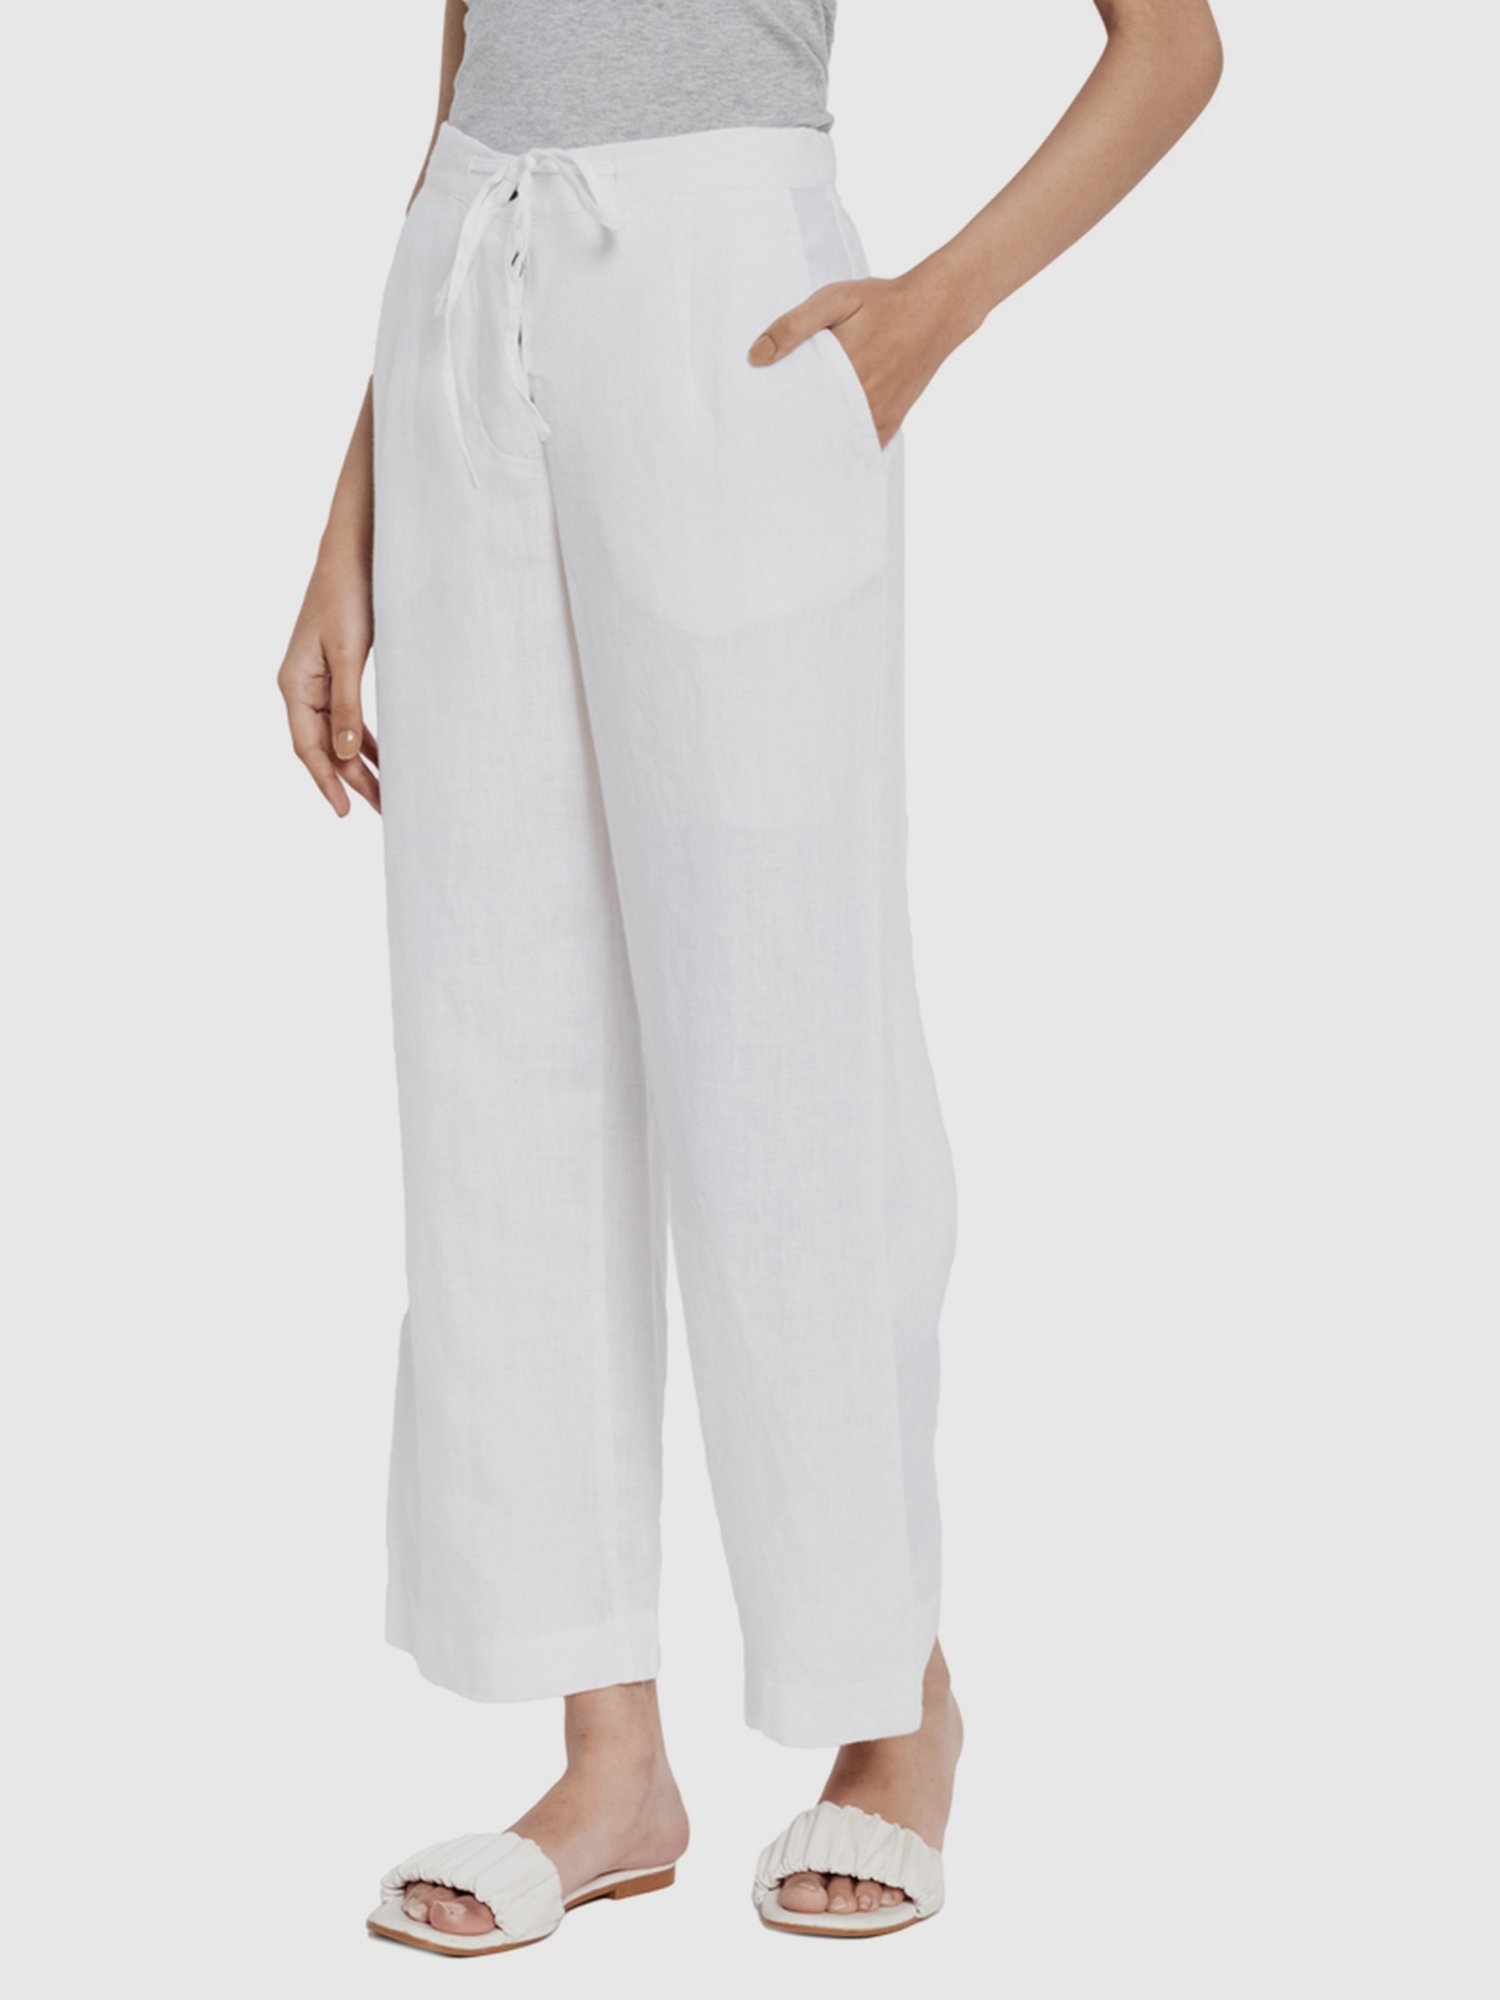 White Linen Blend Trousers  Women  George at ASDA